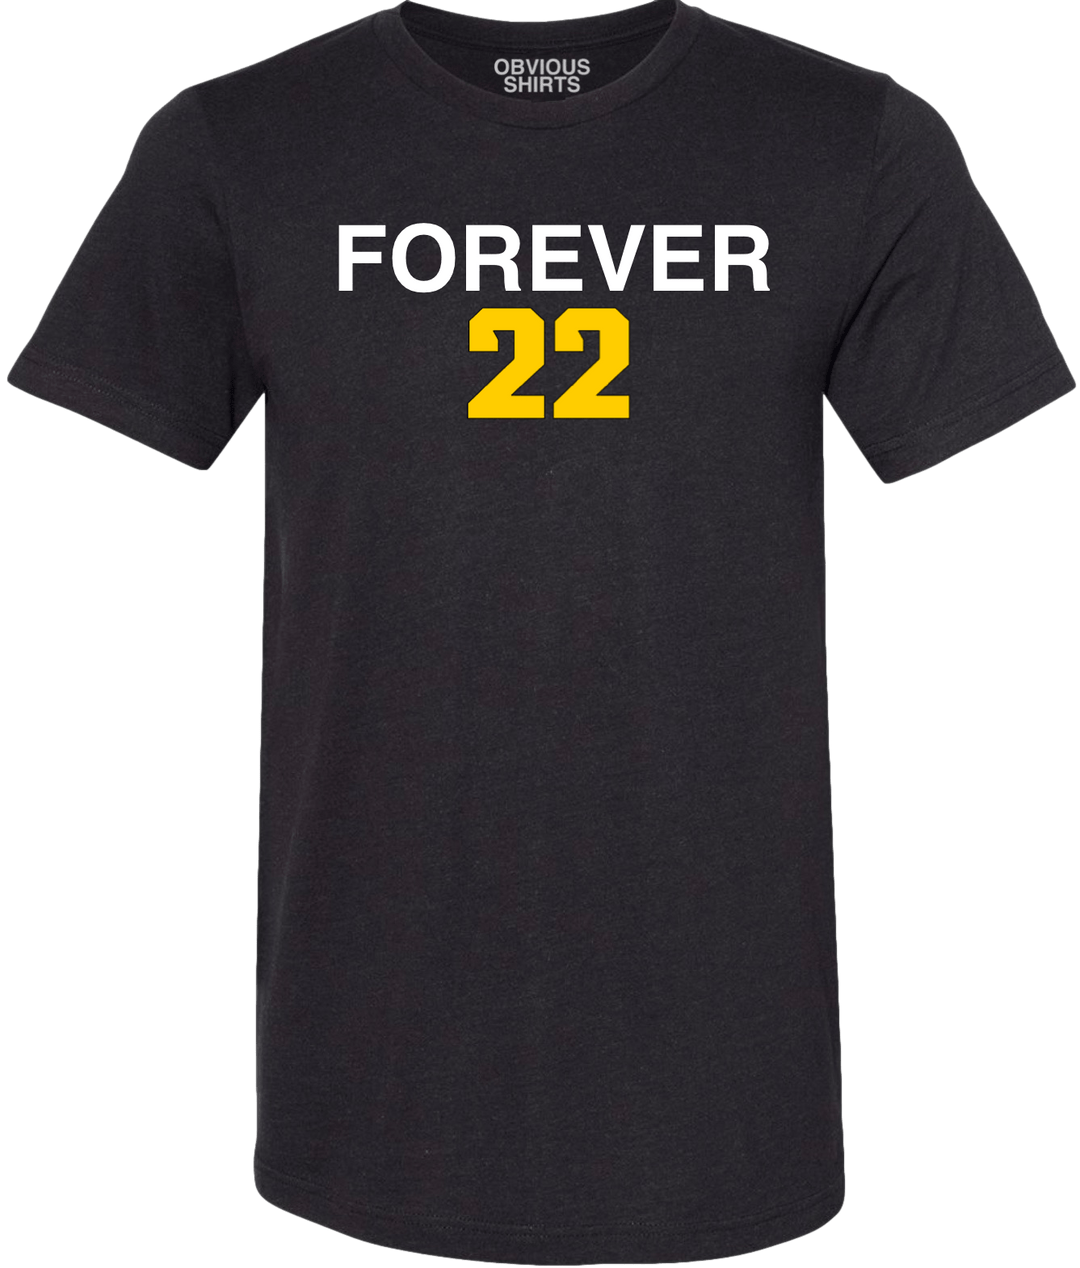 FOREVER 22 - OBVIOUS SHIRTS